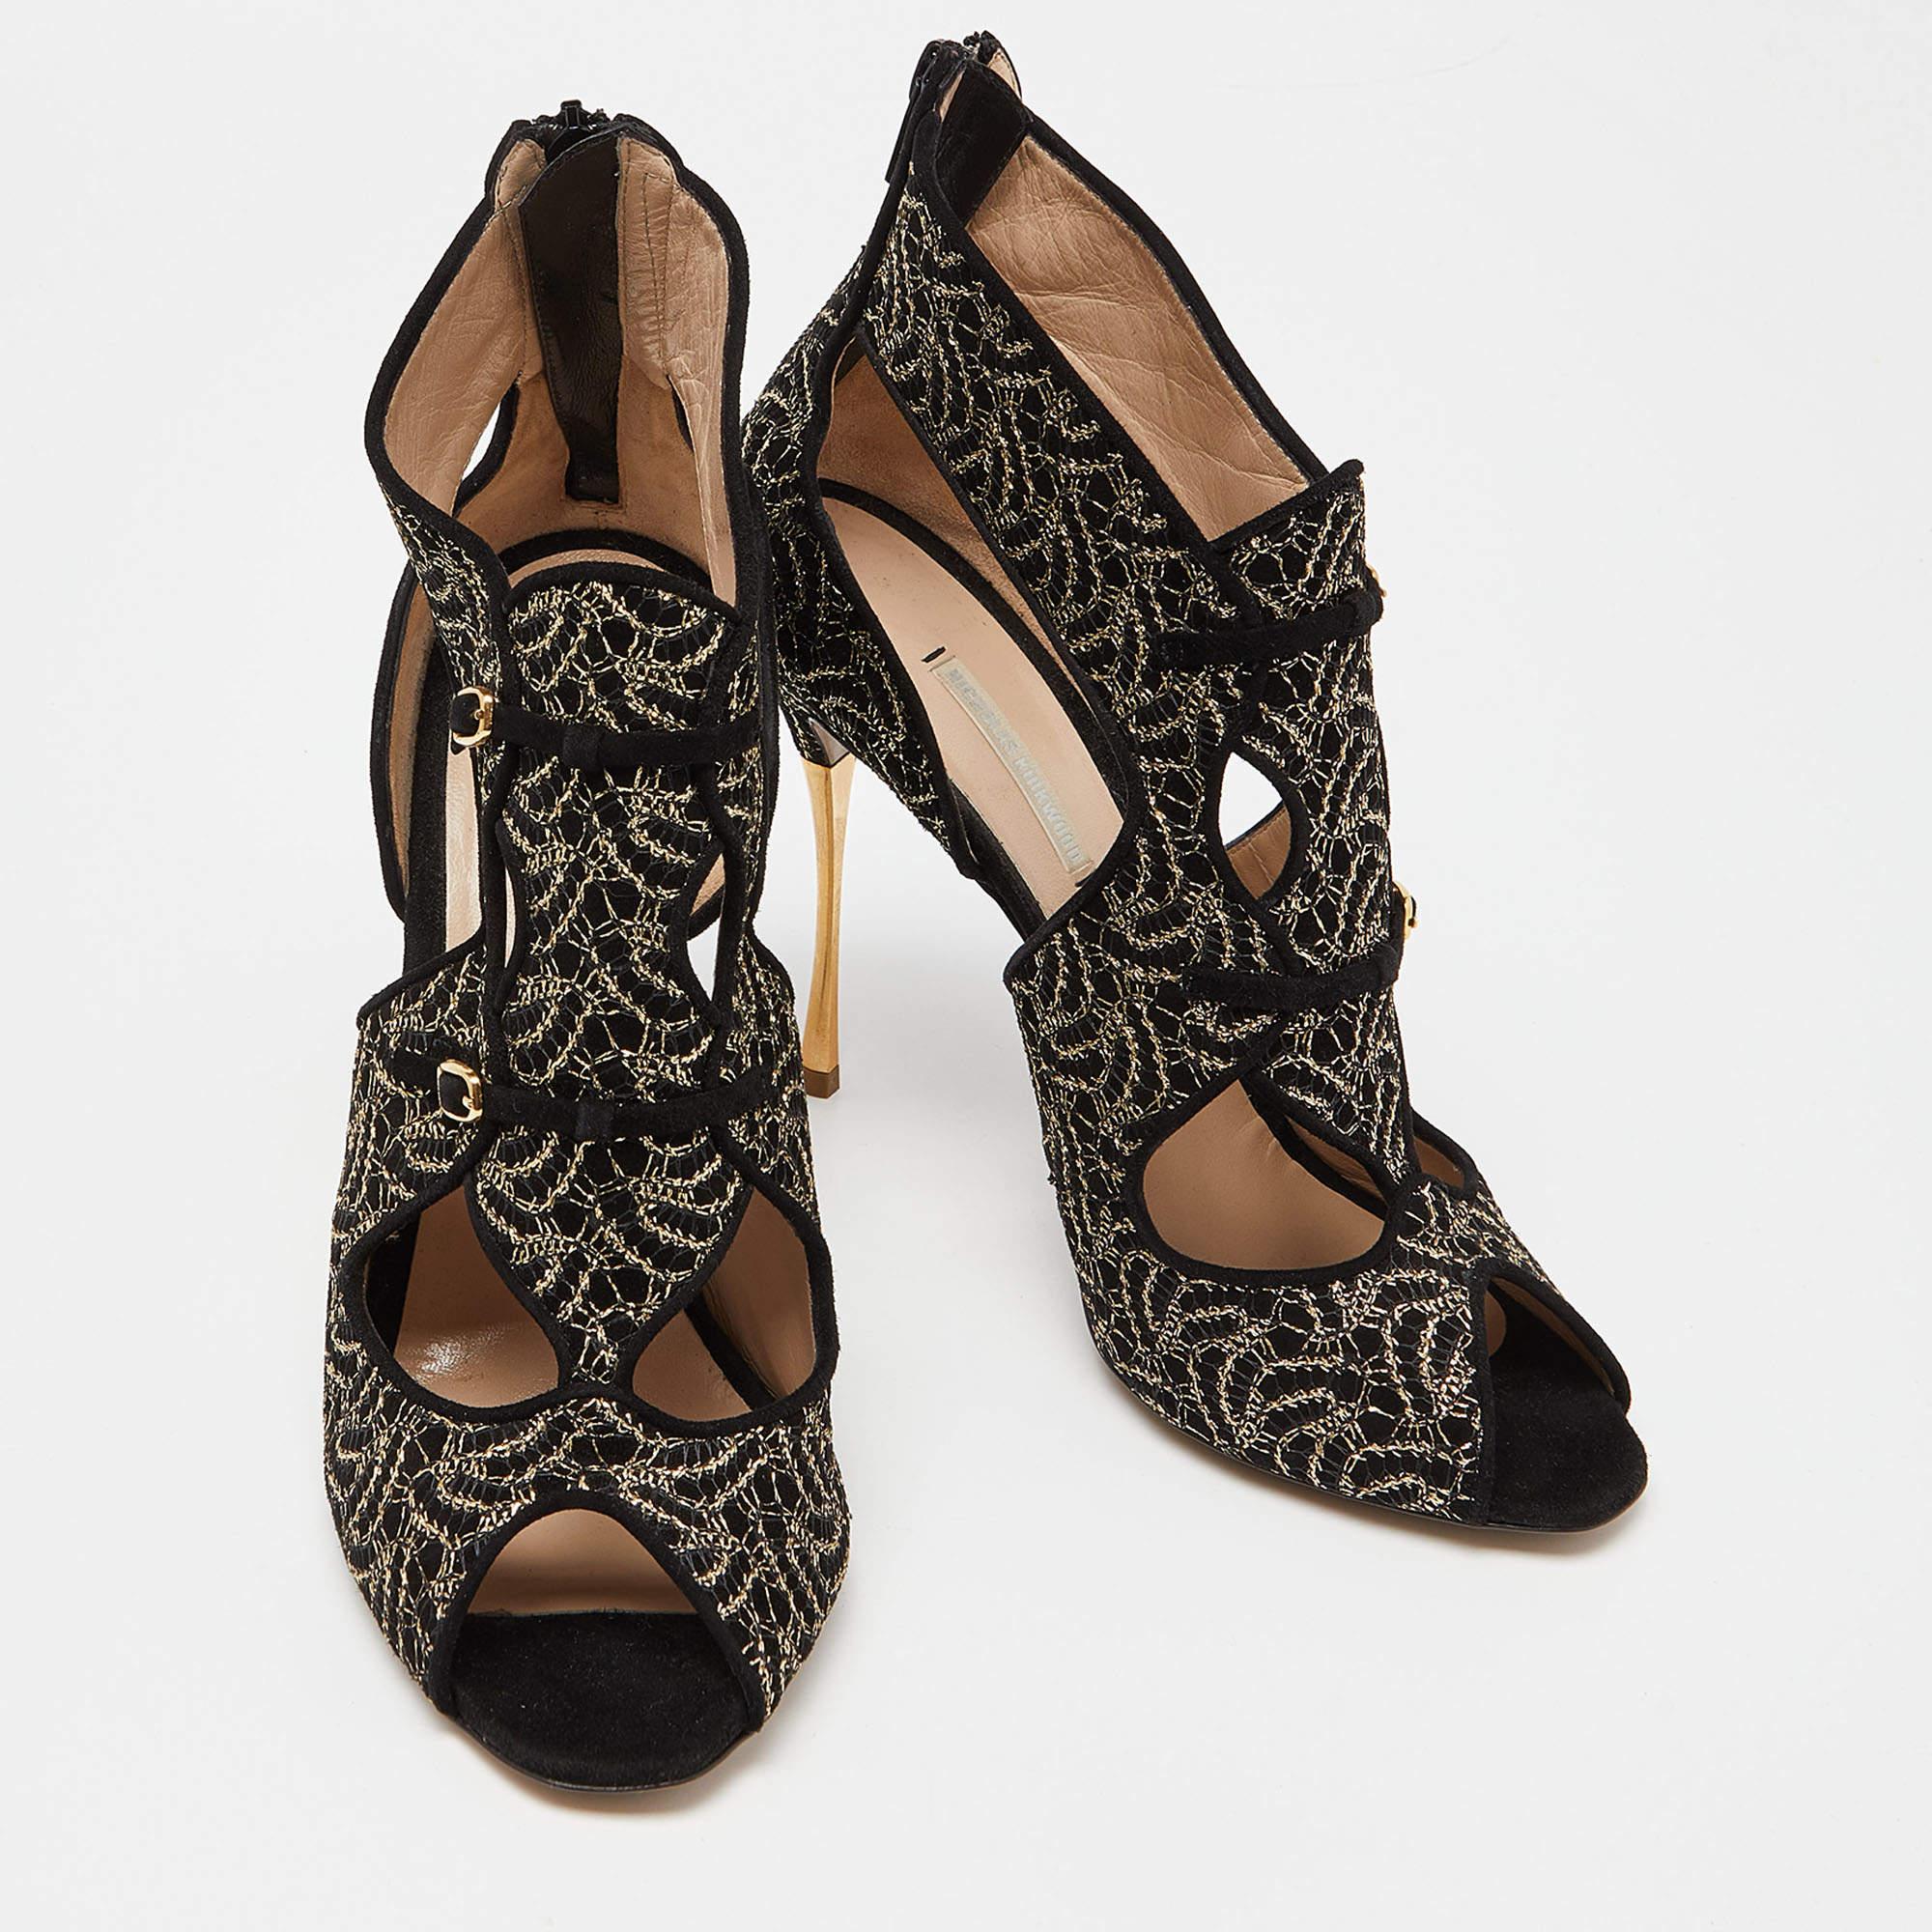 Nicholas Kirkwood Black/Gold Embroidered Suede Cut Out Sandals Size 41 In New Condition For Sale In Dubai, Al Qouz 2